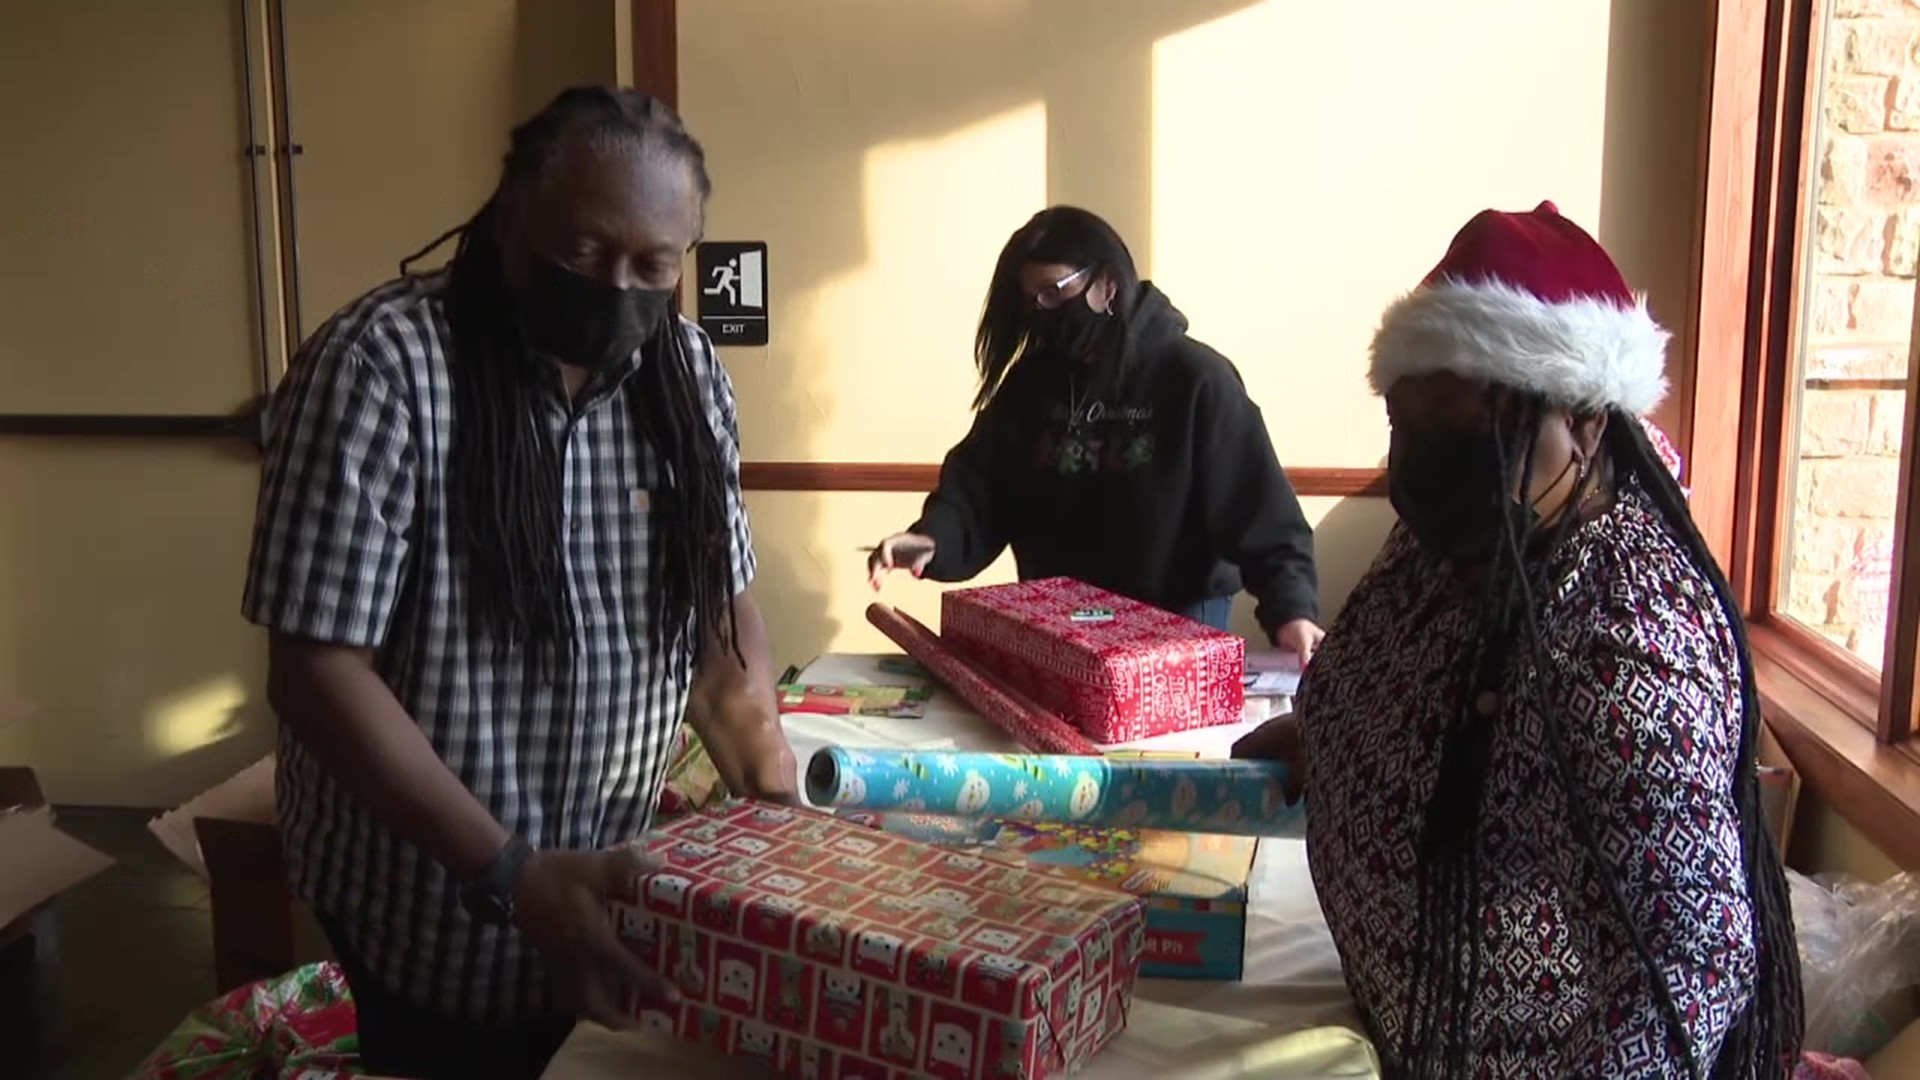 More than 100 children will have a Christmas they won't soon forget thanks to an annual event in Monroe County.